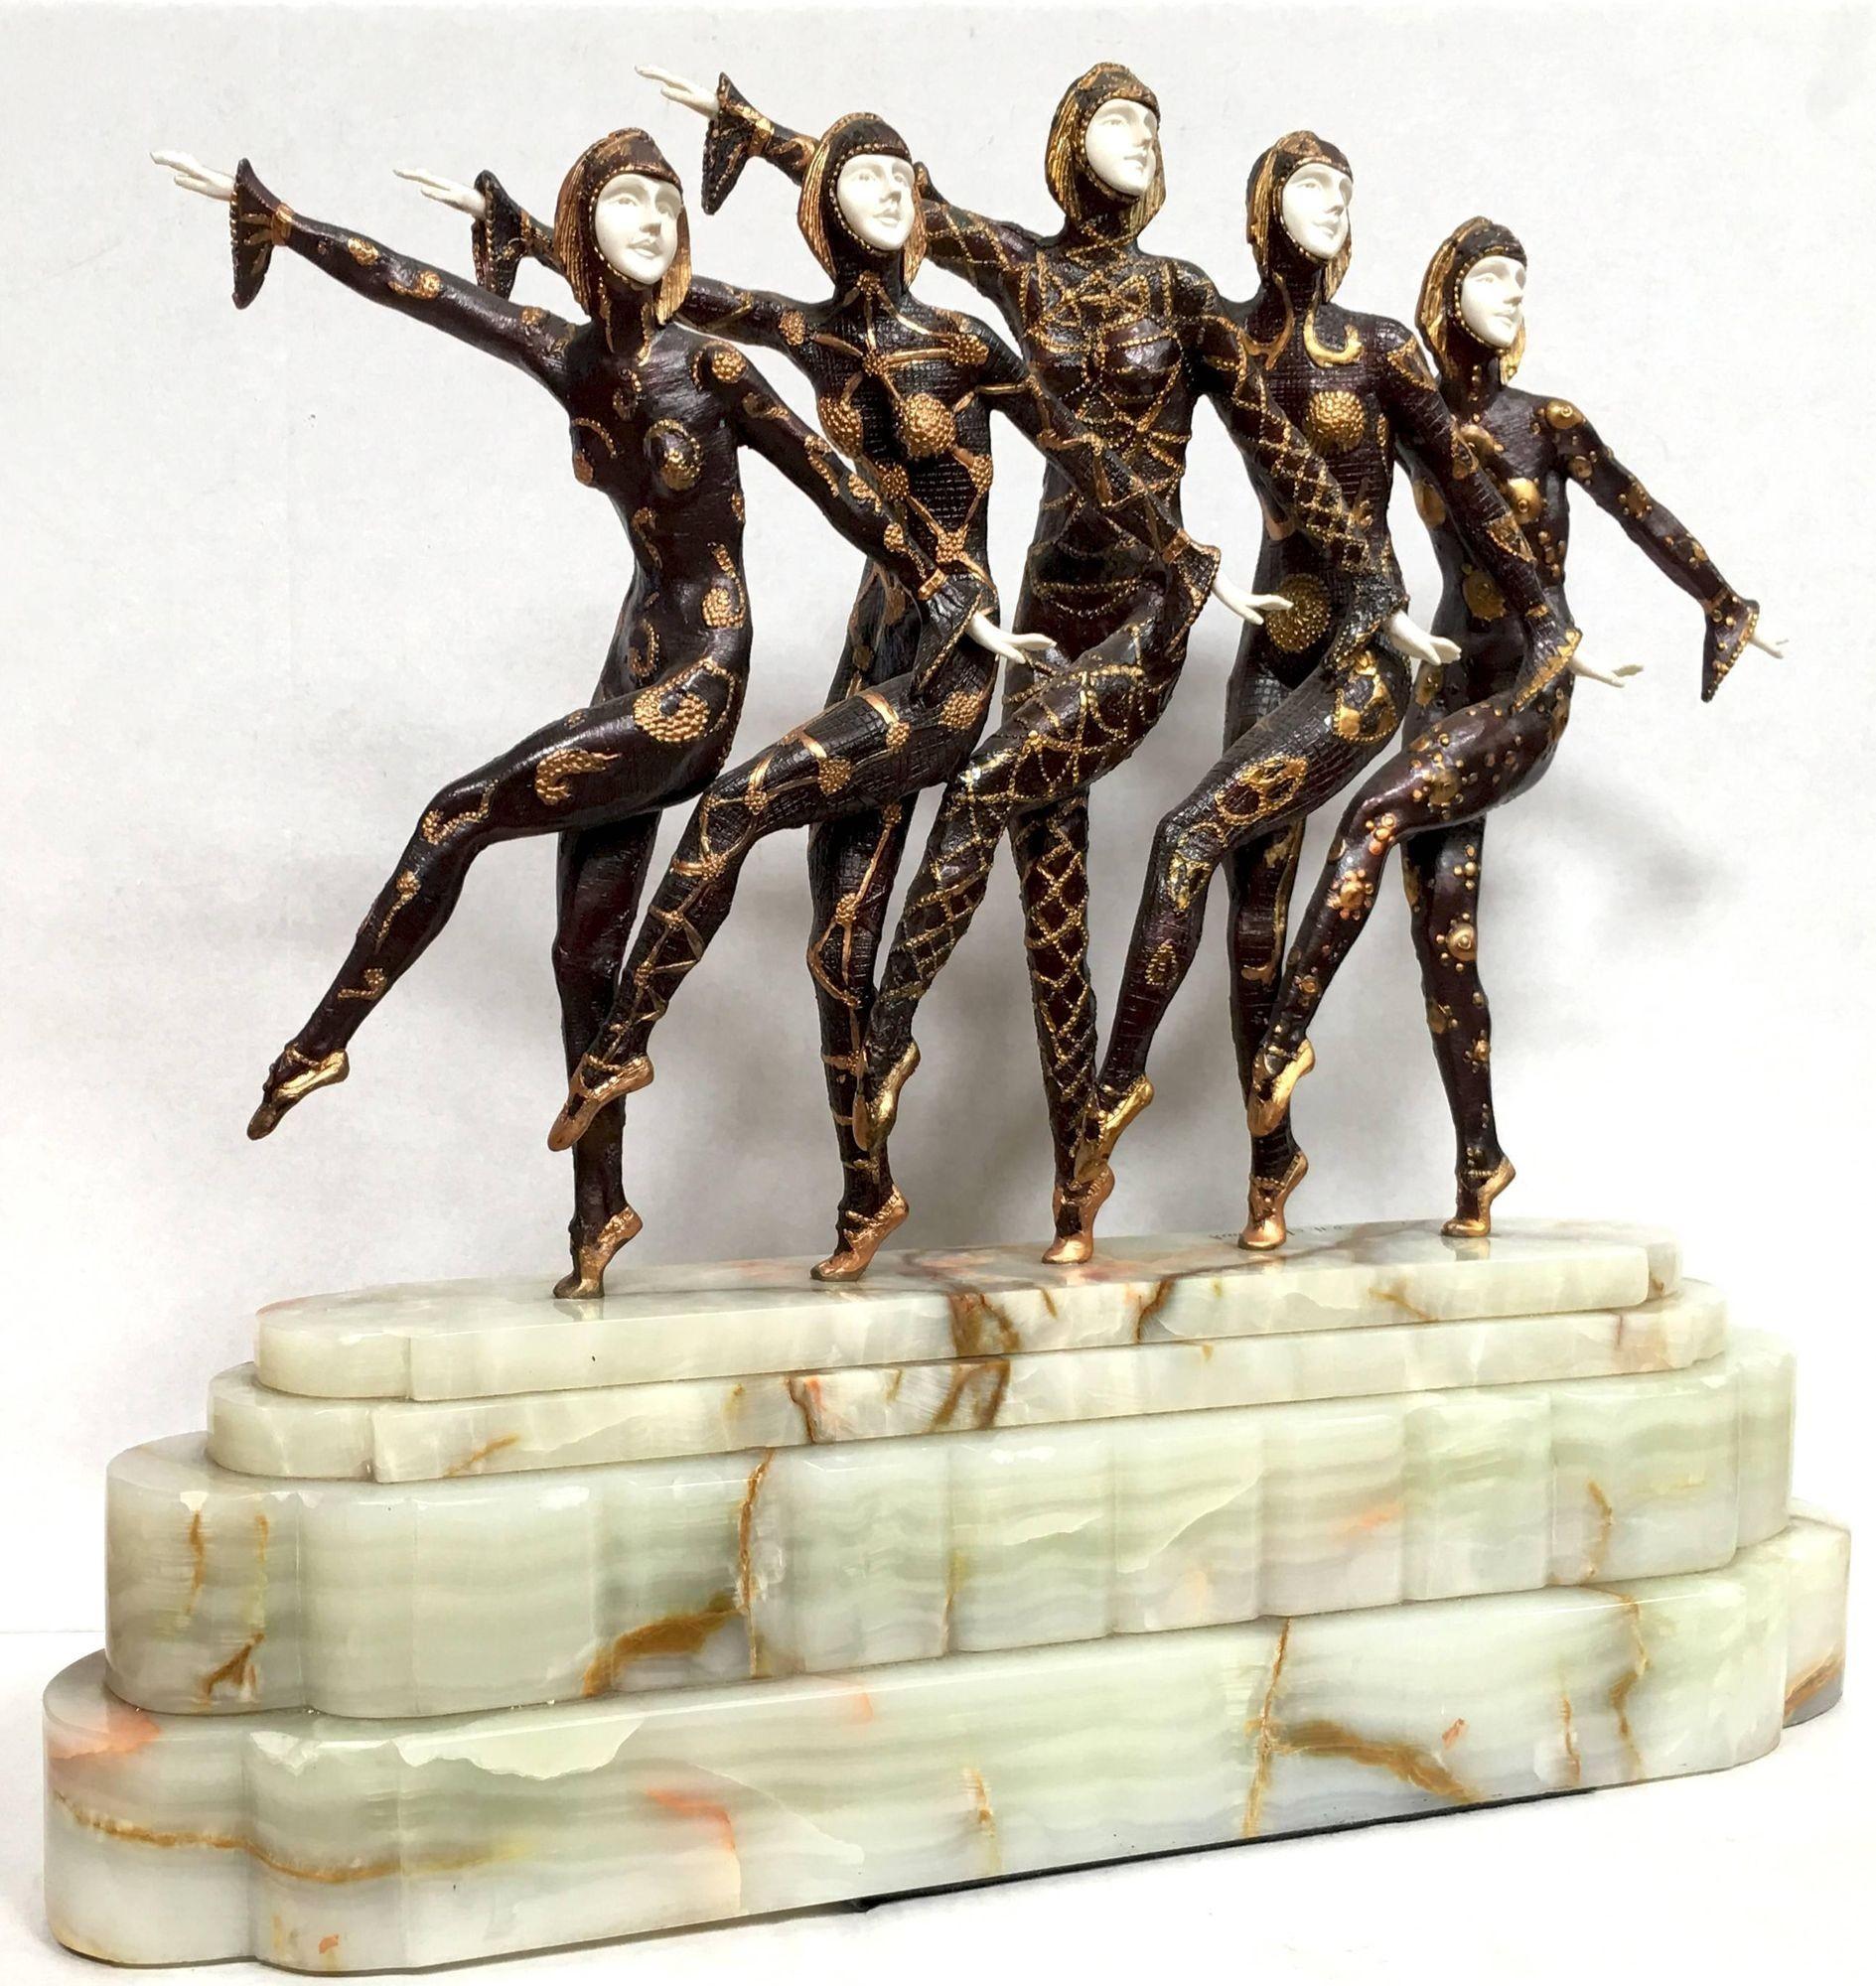 Large Art Deco sculpture of five Chiparus style dancer with marble base.

Product handcrafted in the USA with the highest quality materials and over 30 years of experience in luxury: Lighting (chandeliers, floor lamps, table lamps, sconces), fine